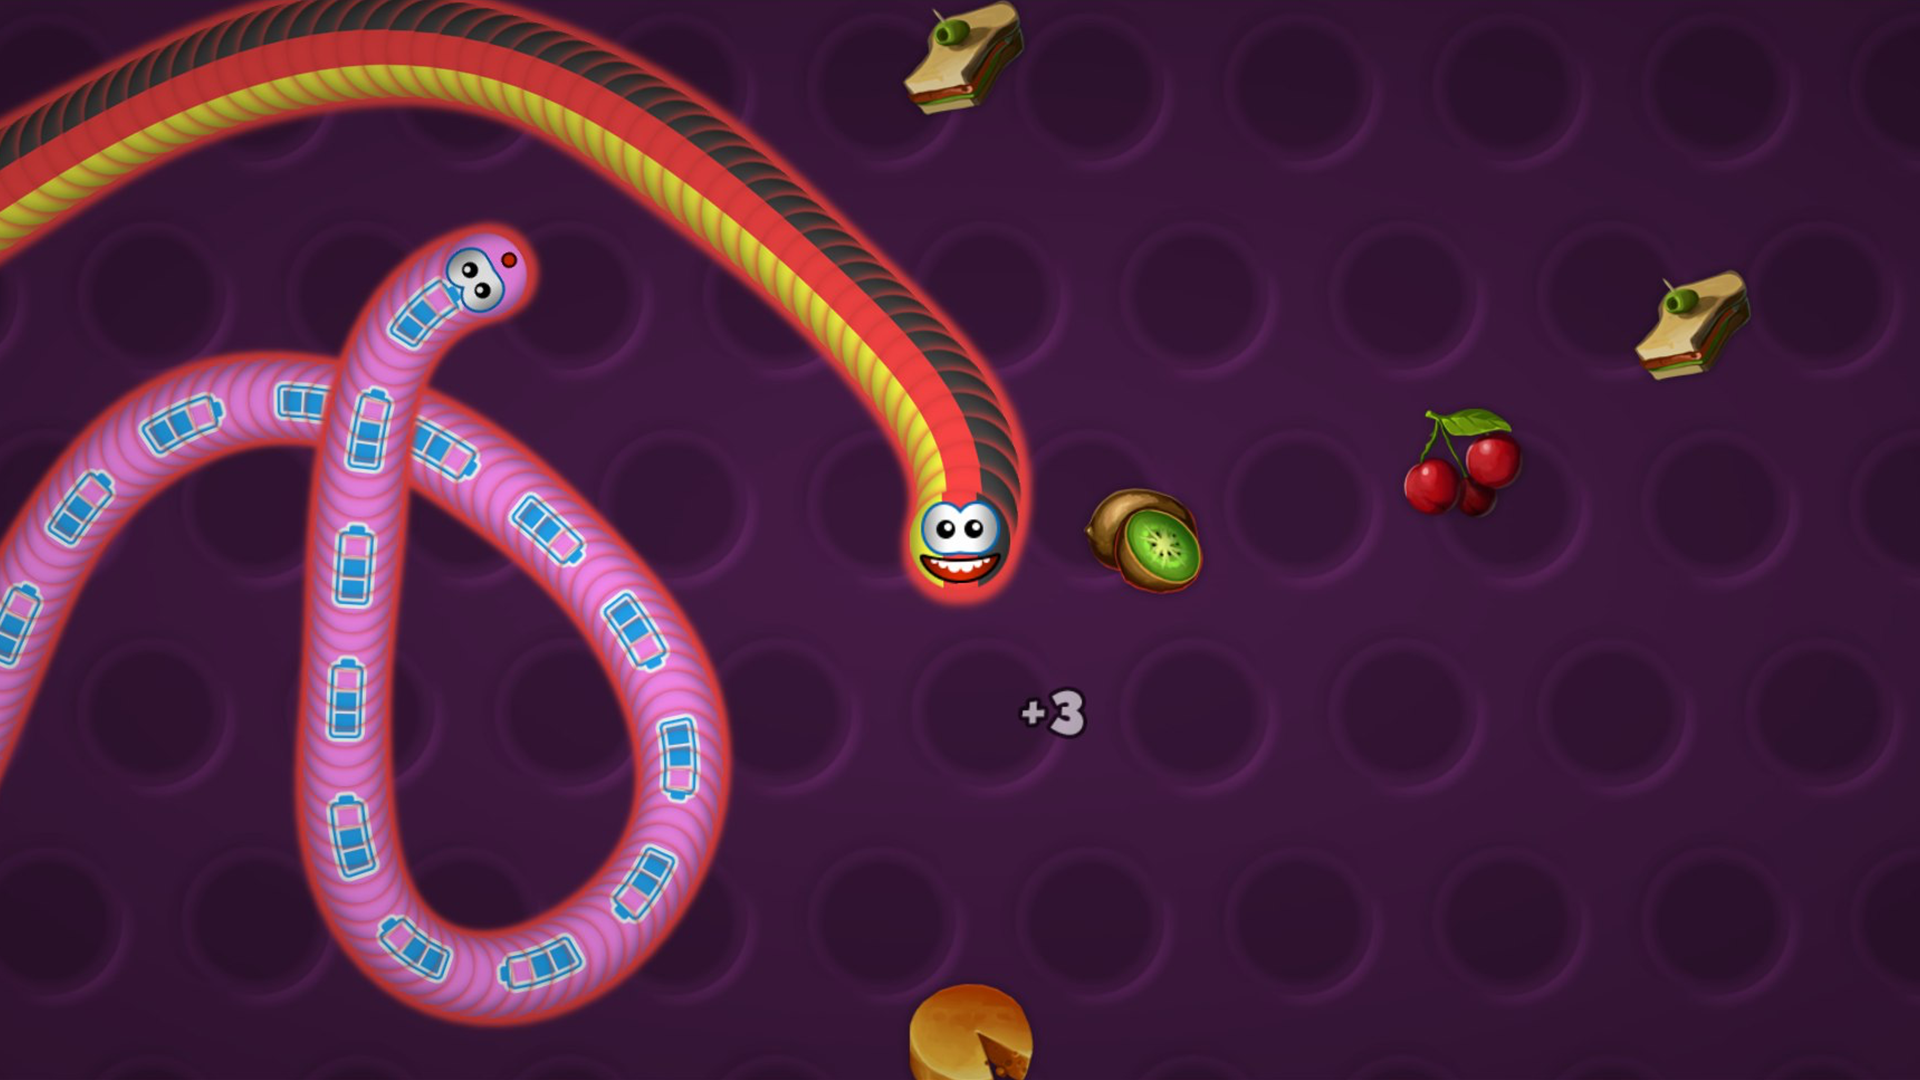 Slither.io para PC - Mac - Linux - Android - iOS